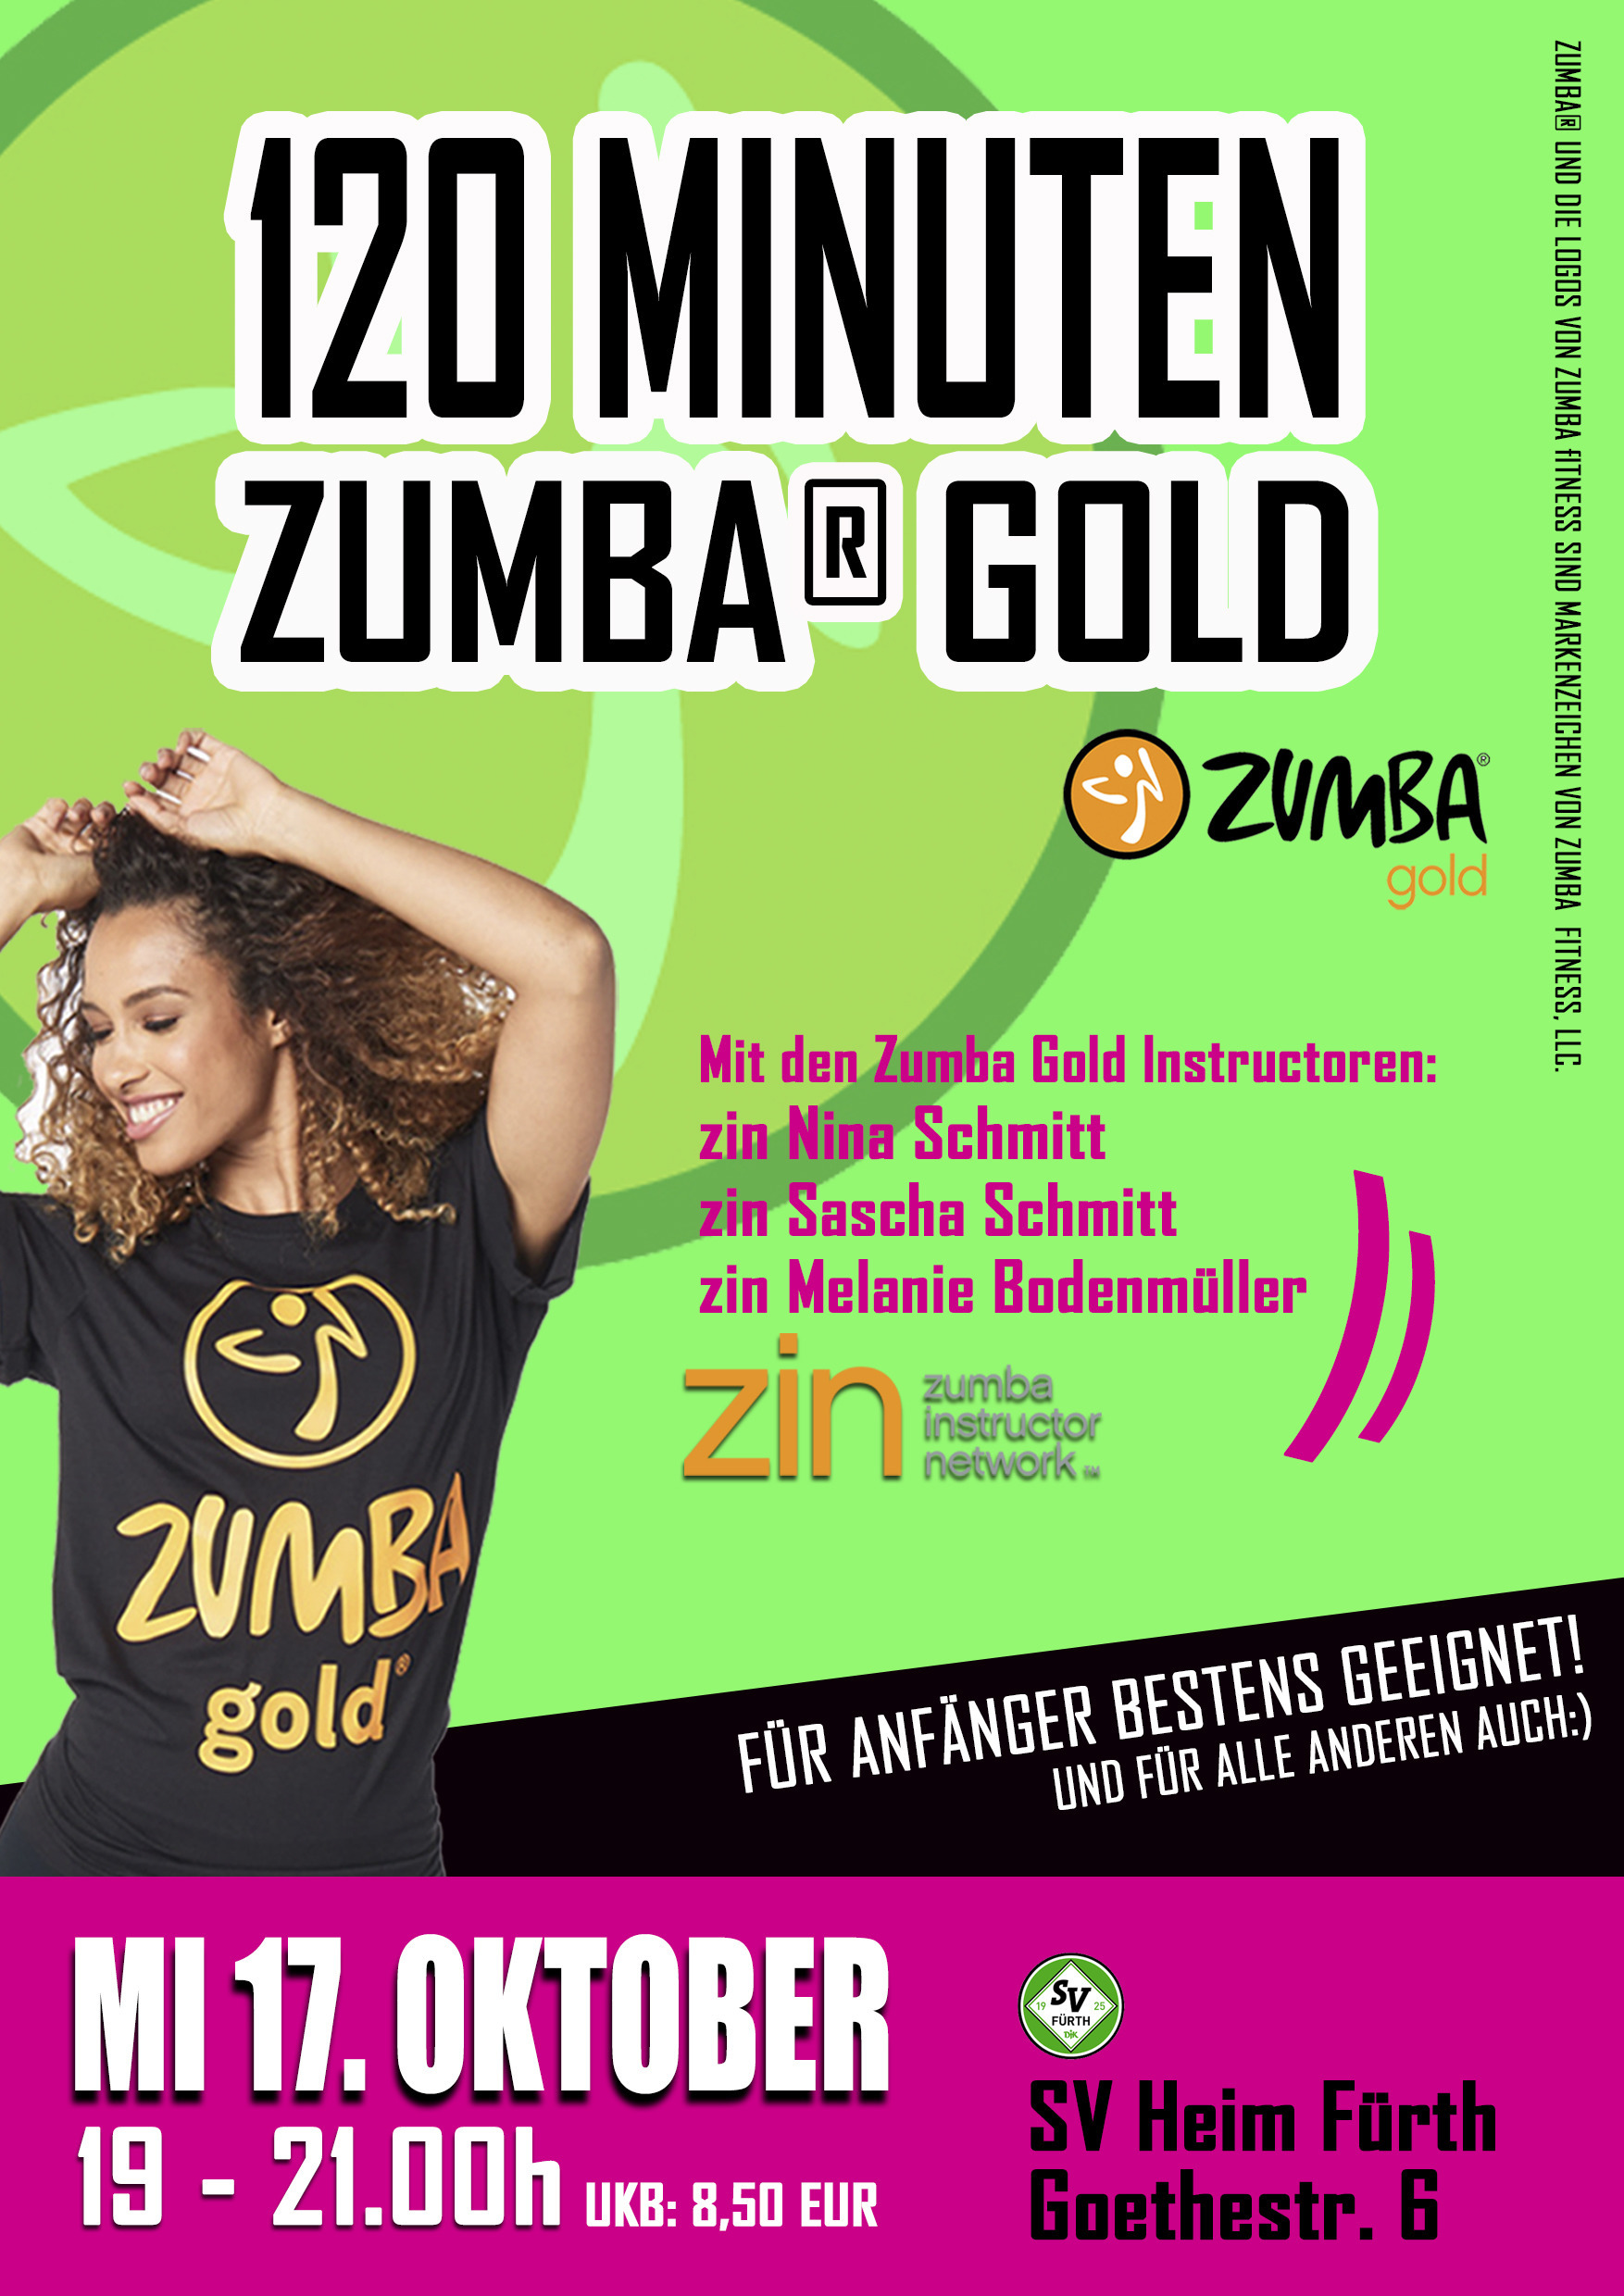 Zumba Ditch The Workout Join The Party